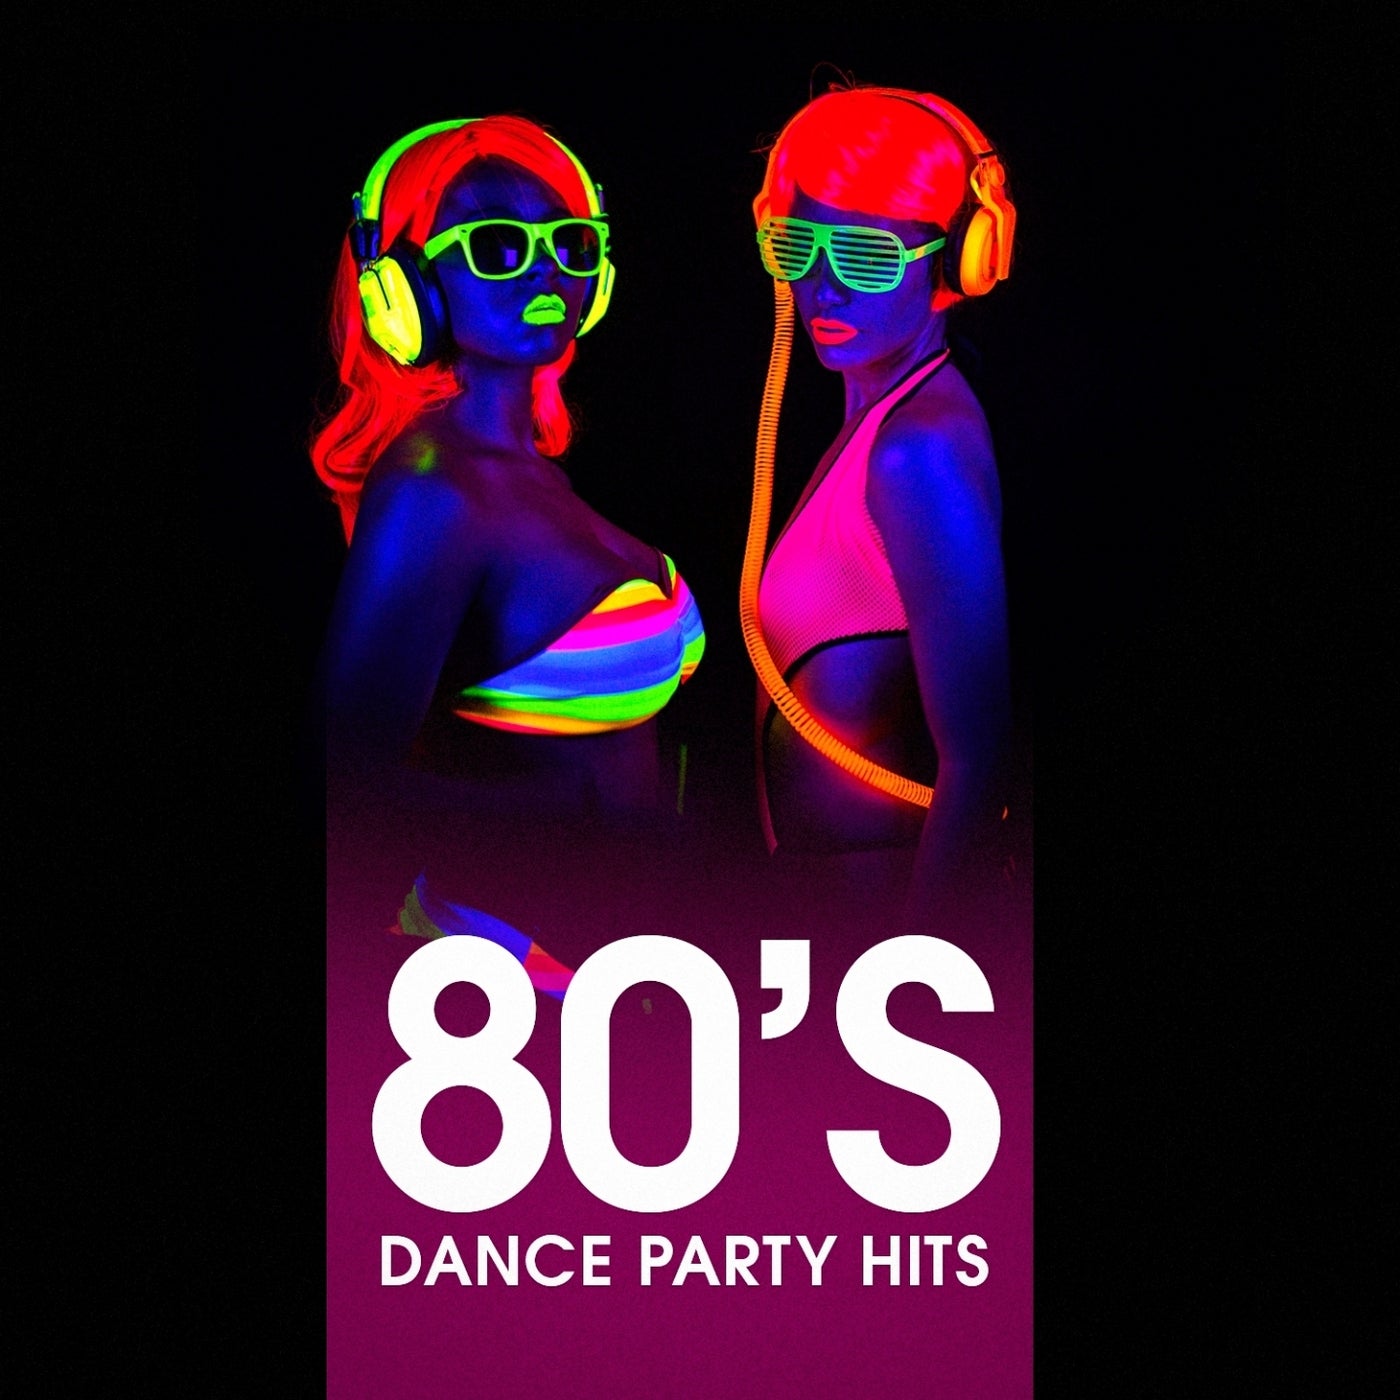 80's Best Dance Hits - Party Mix by TETA 